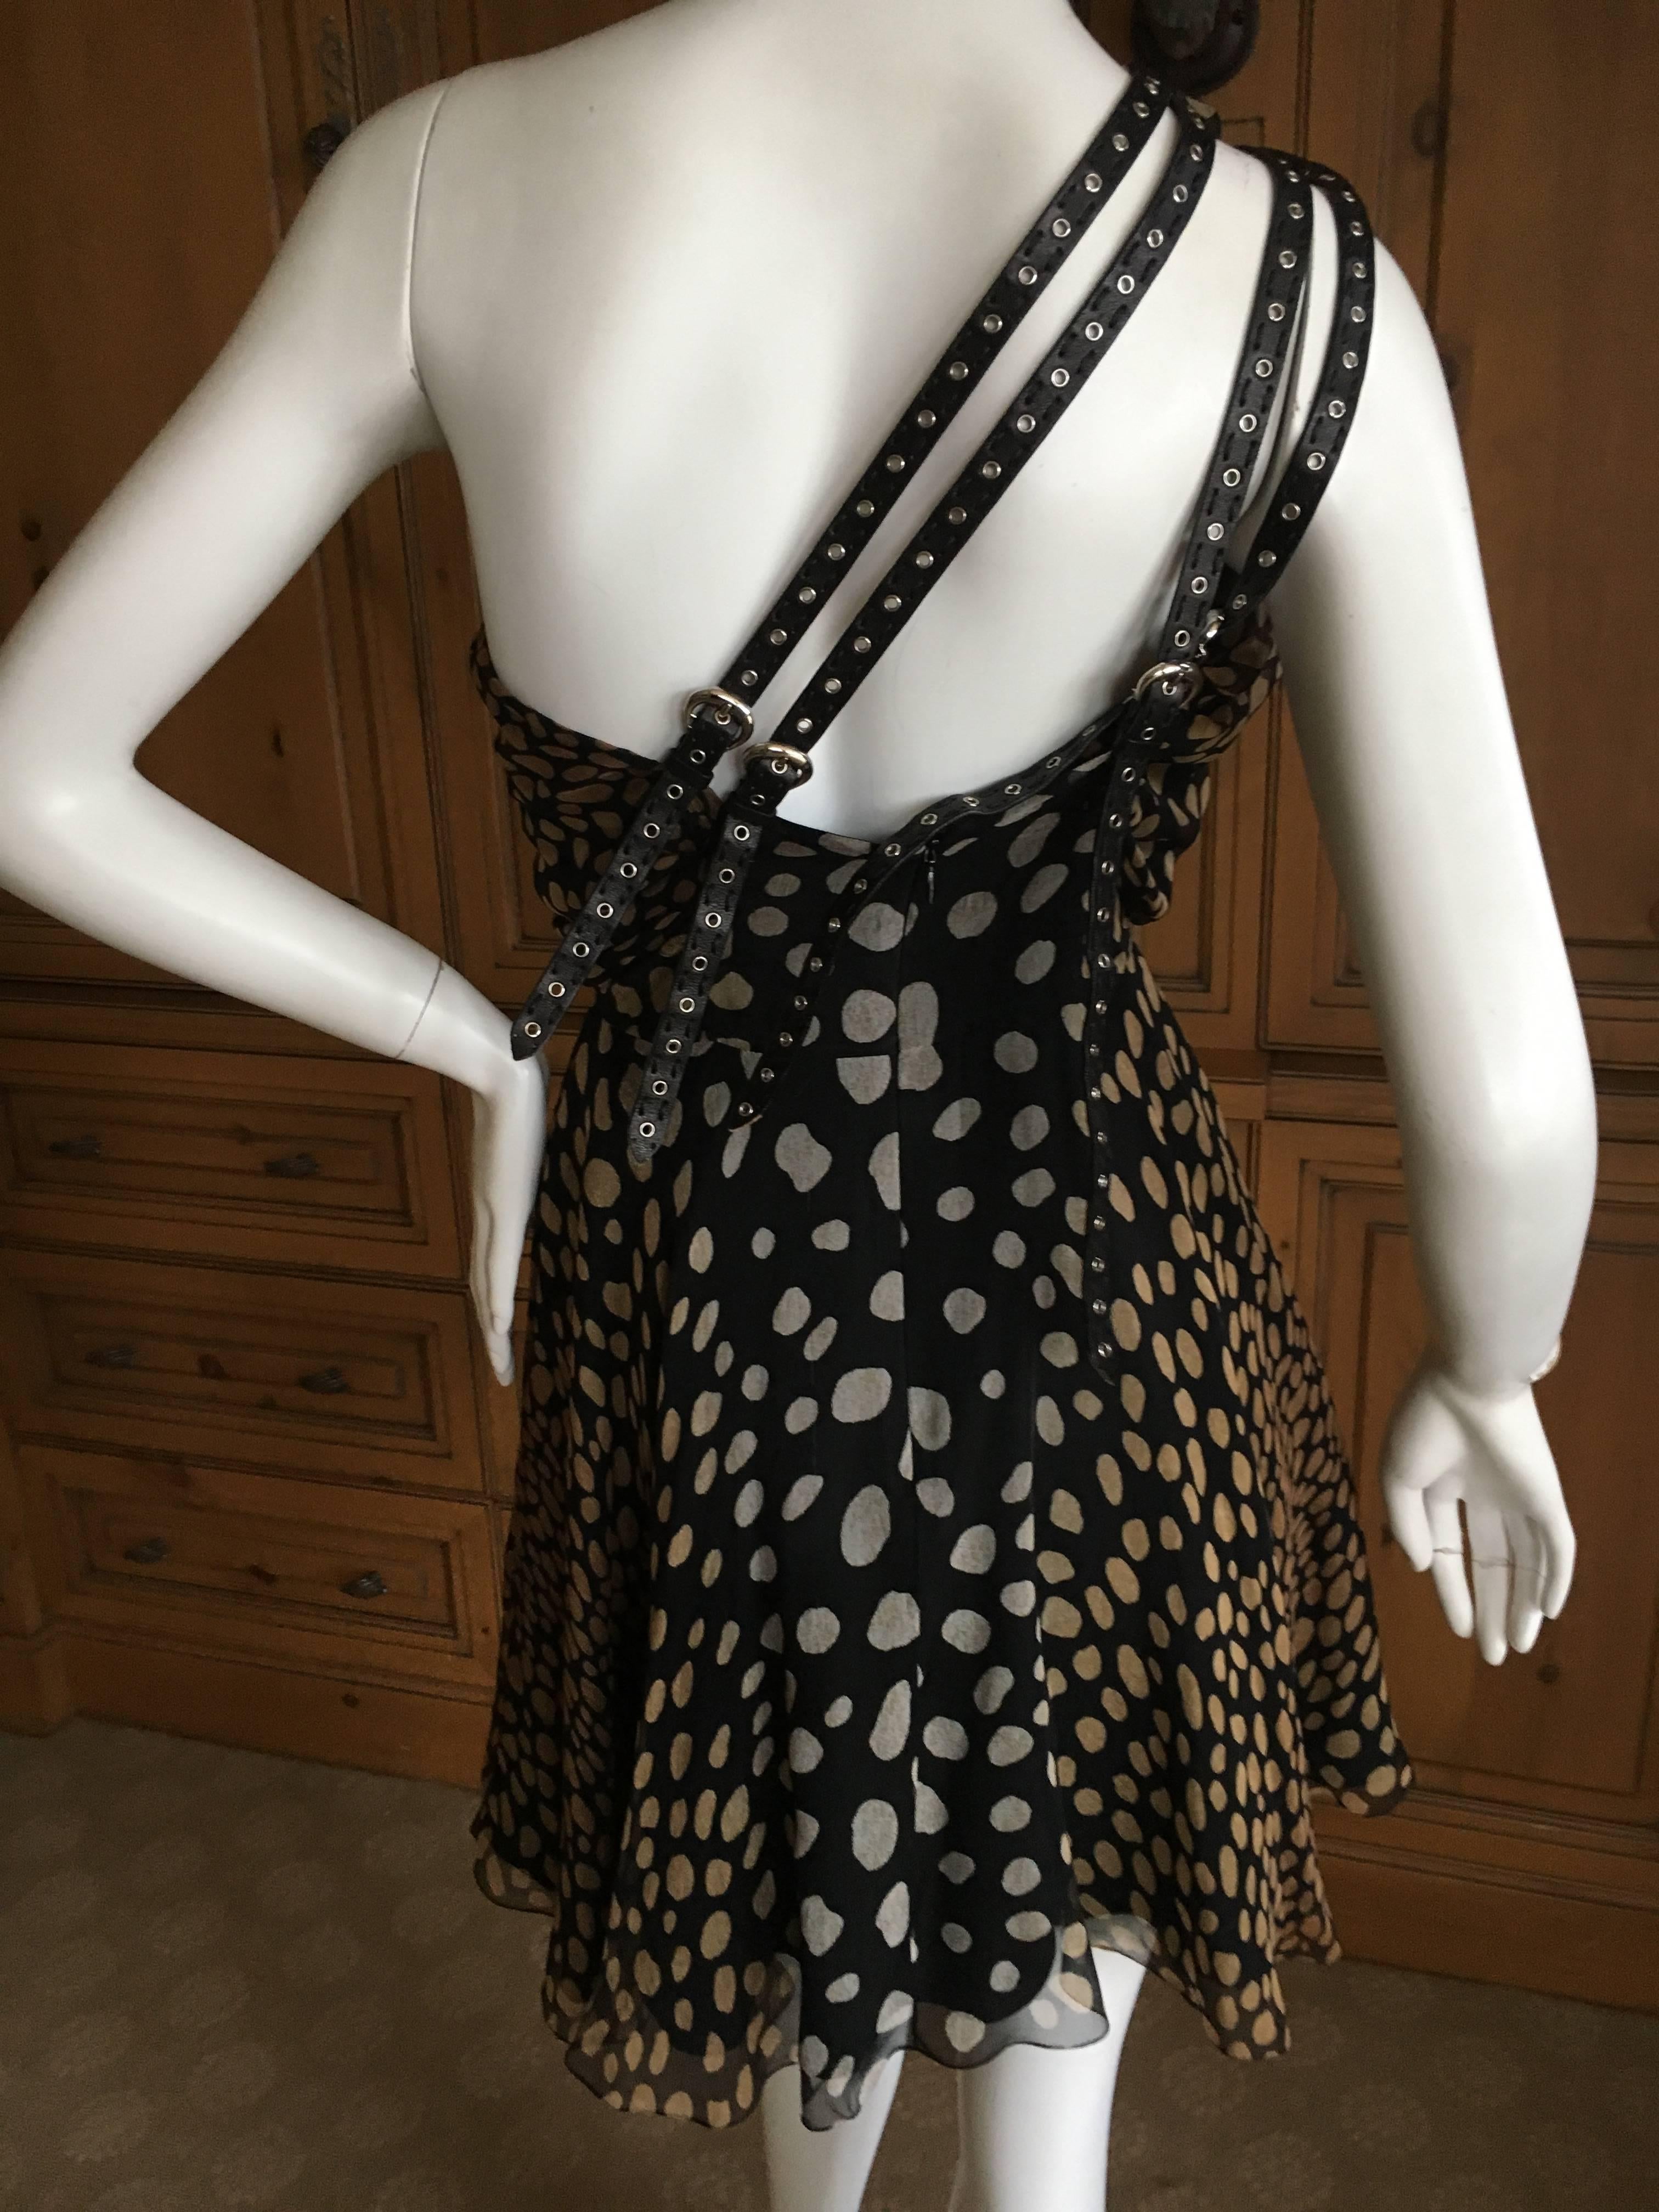 Dior by Galliano Silk Halter Mini Dress with Leather Bondage Strap Details In Excellent Condition For Sale In Cloverdale, CA